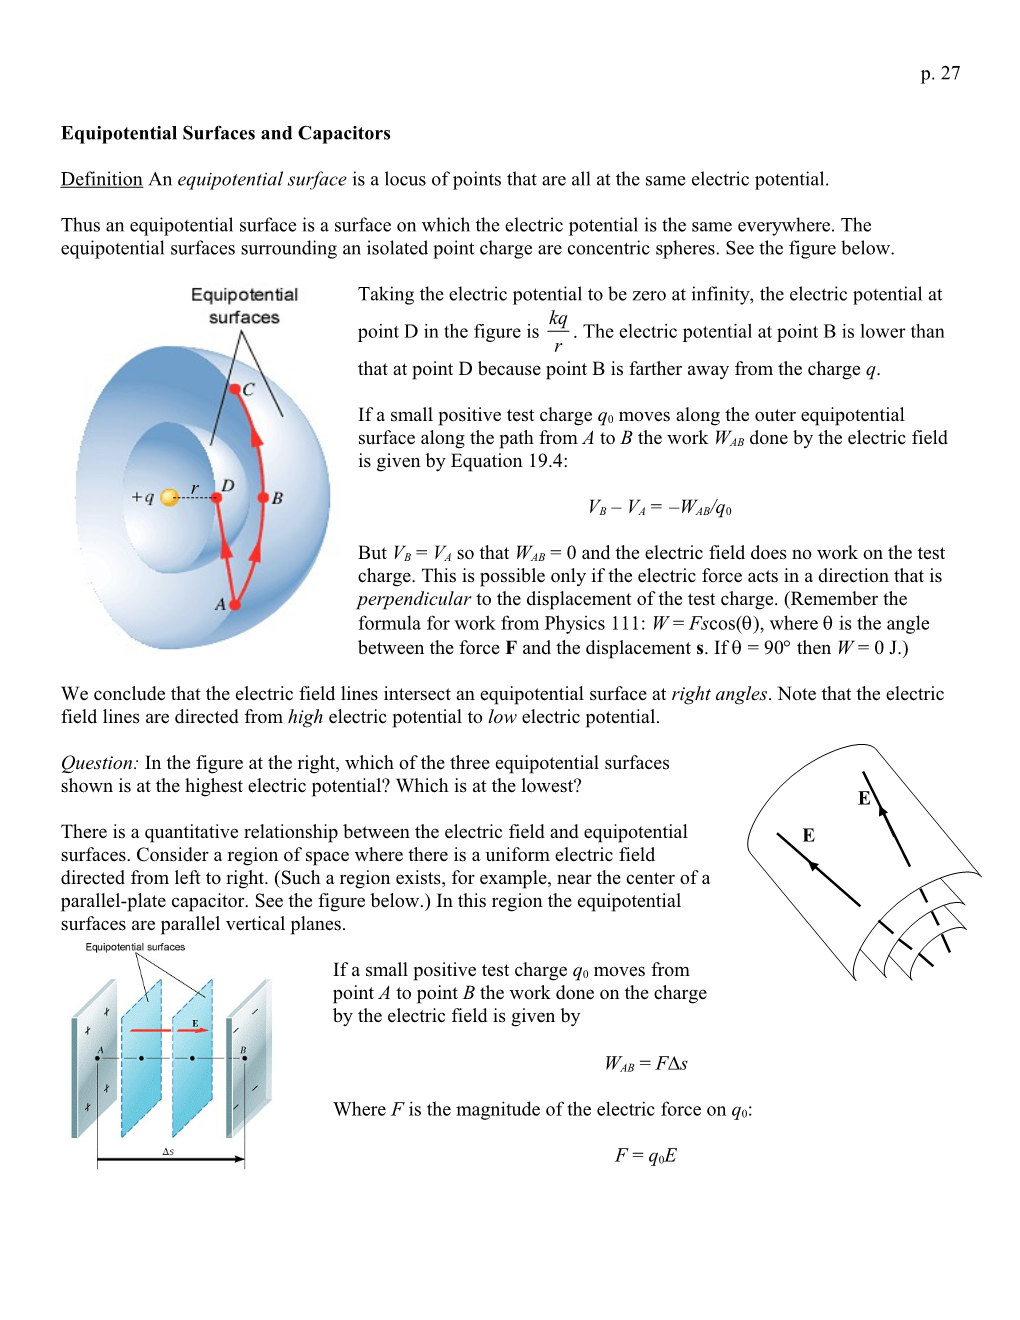 Equipotential Surfaces and Capacitors